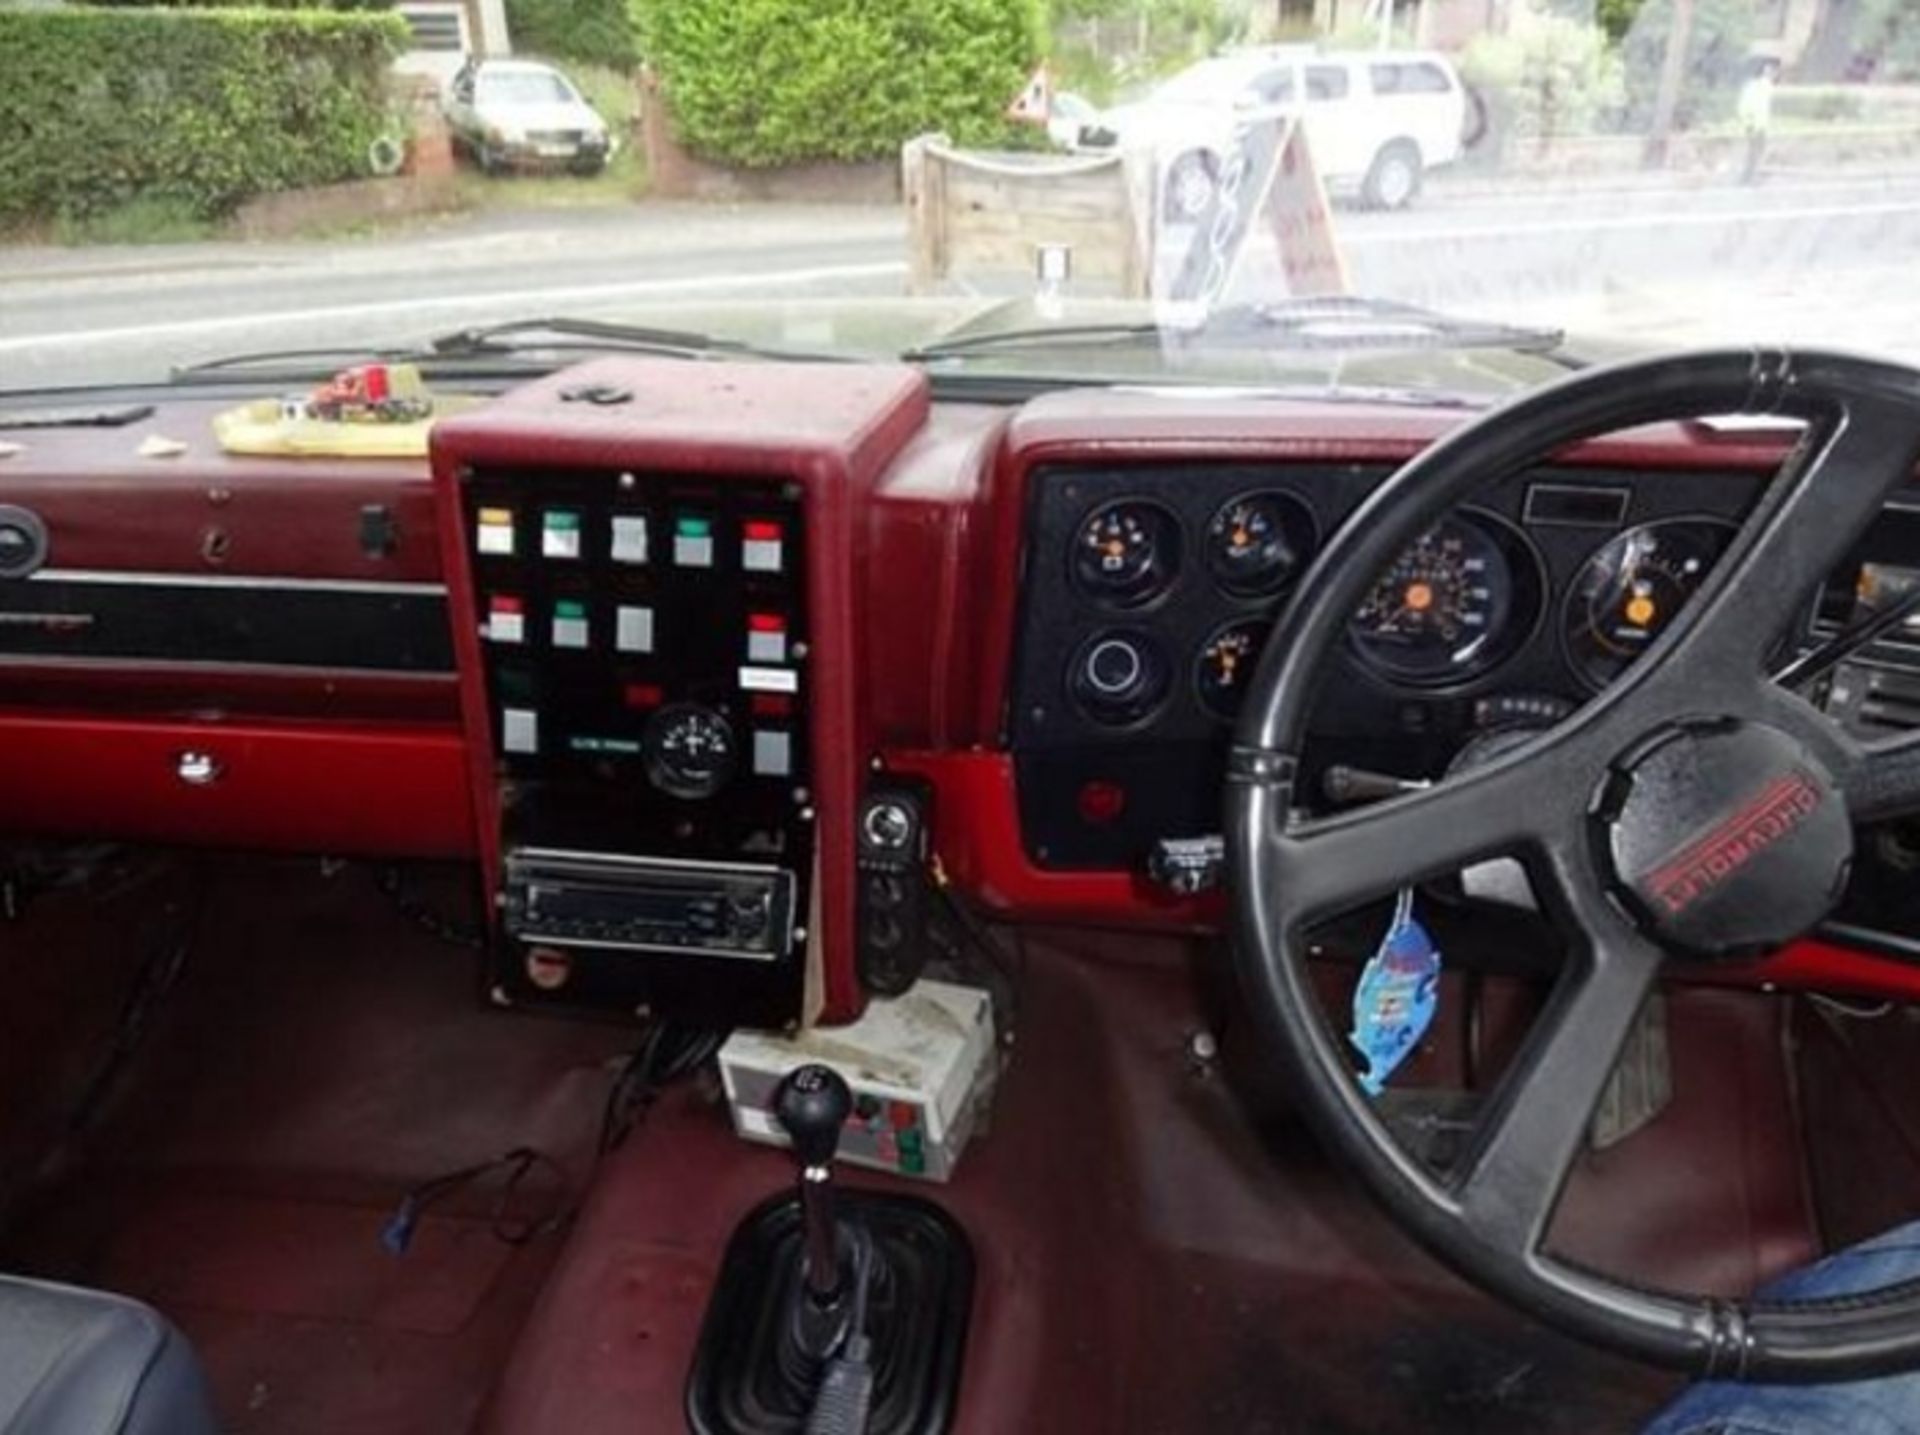 1989 Gmc Chevrolet Fire Truck, 6X6 Diesel 6.2 R.H.D. Auto-Od (Red) - Image 11 of 24